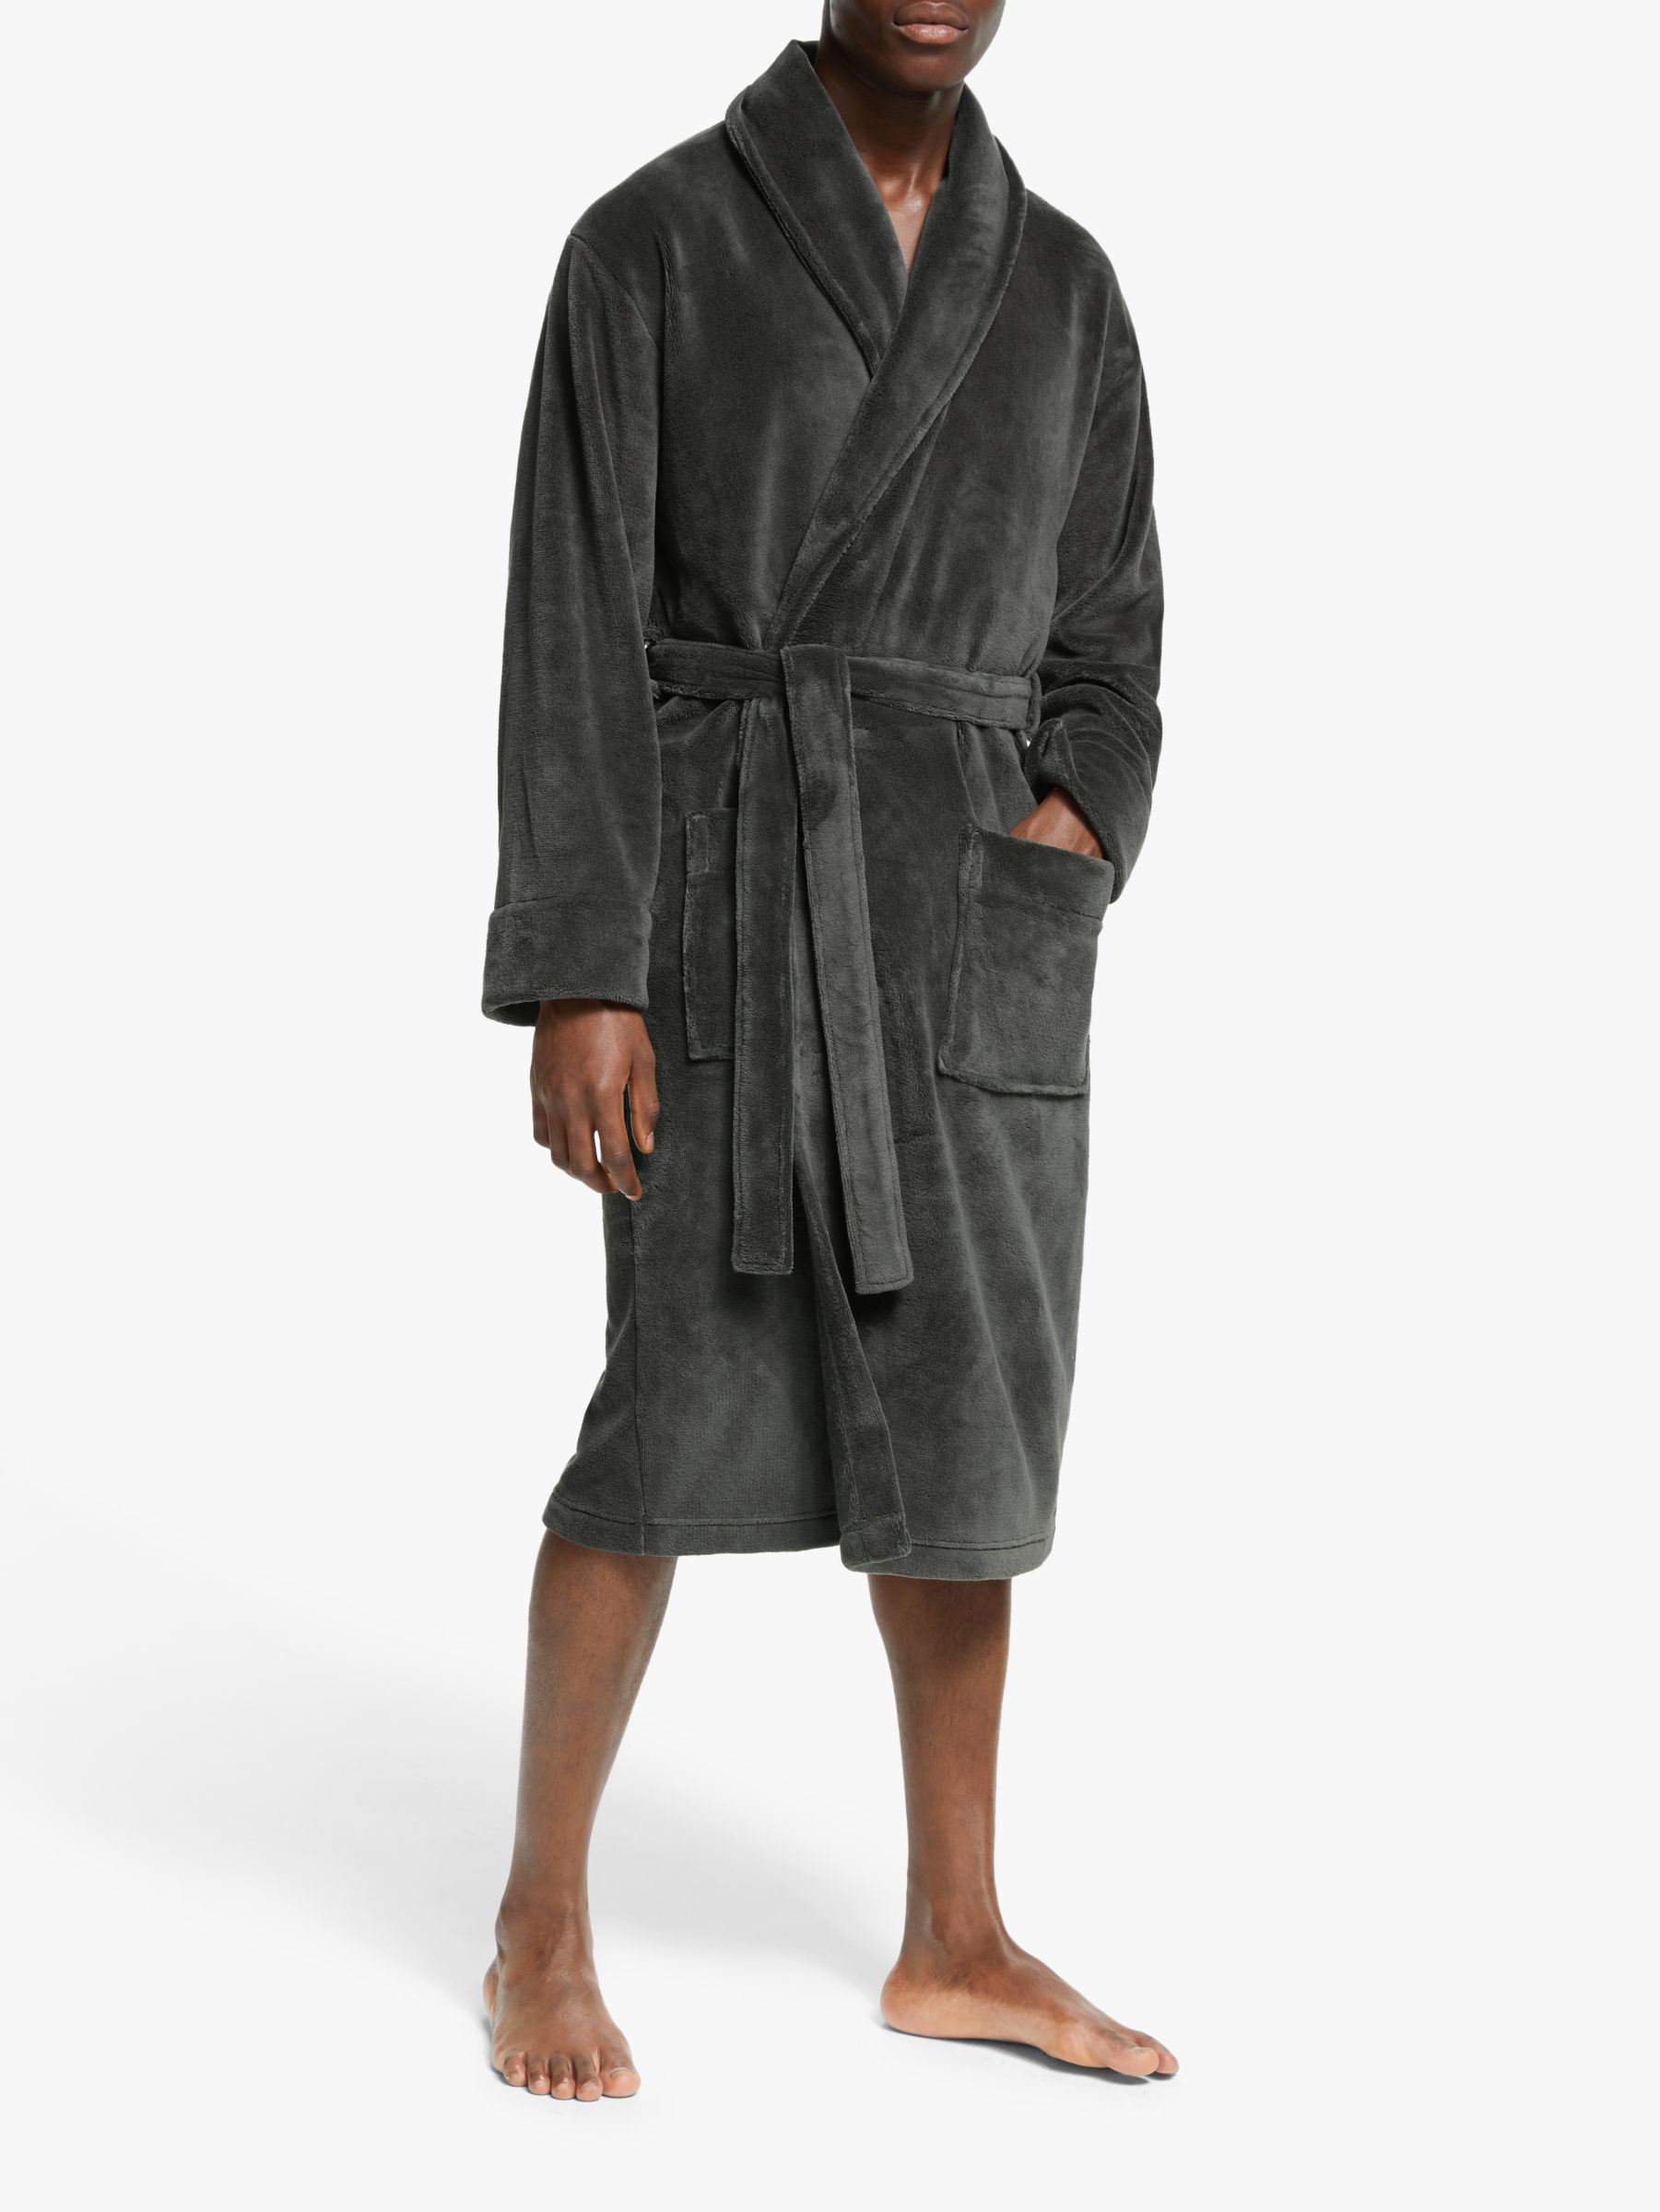 mens dressing gown sale